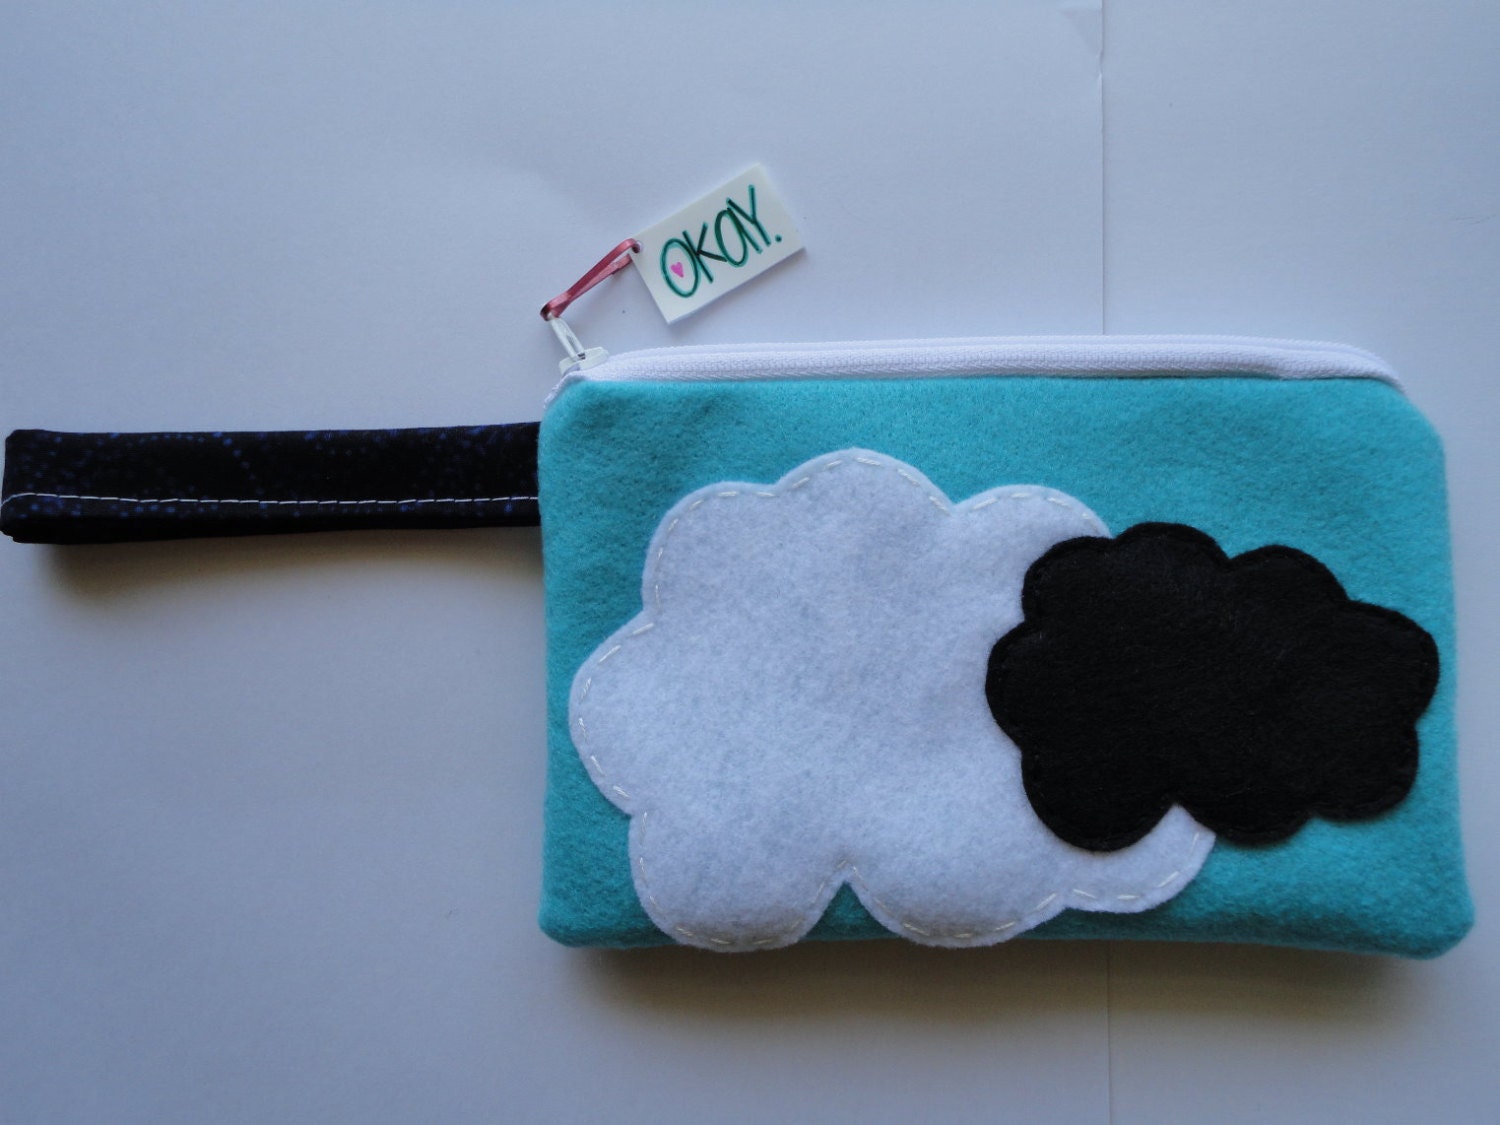 The Fault in Our Stars wristlet